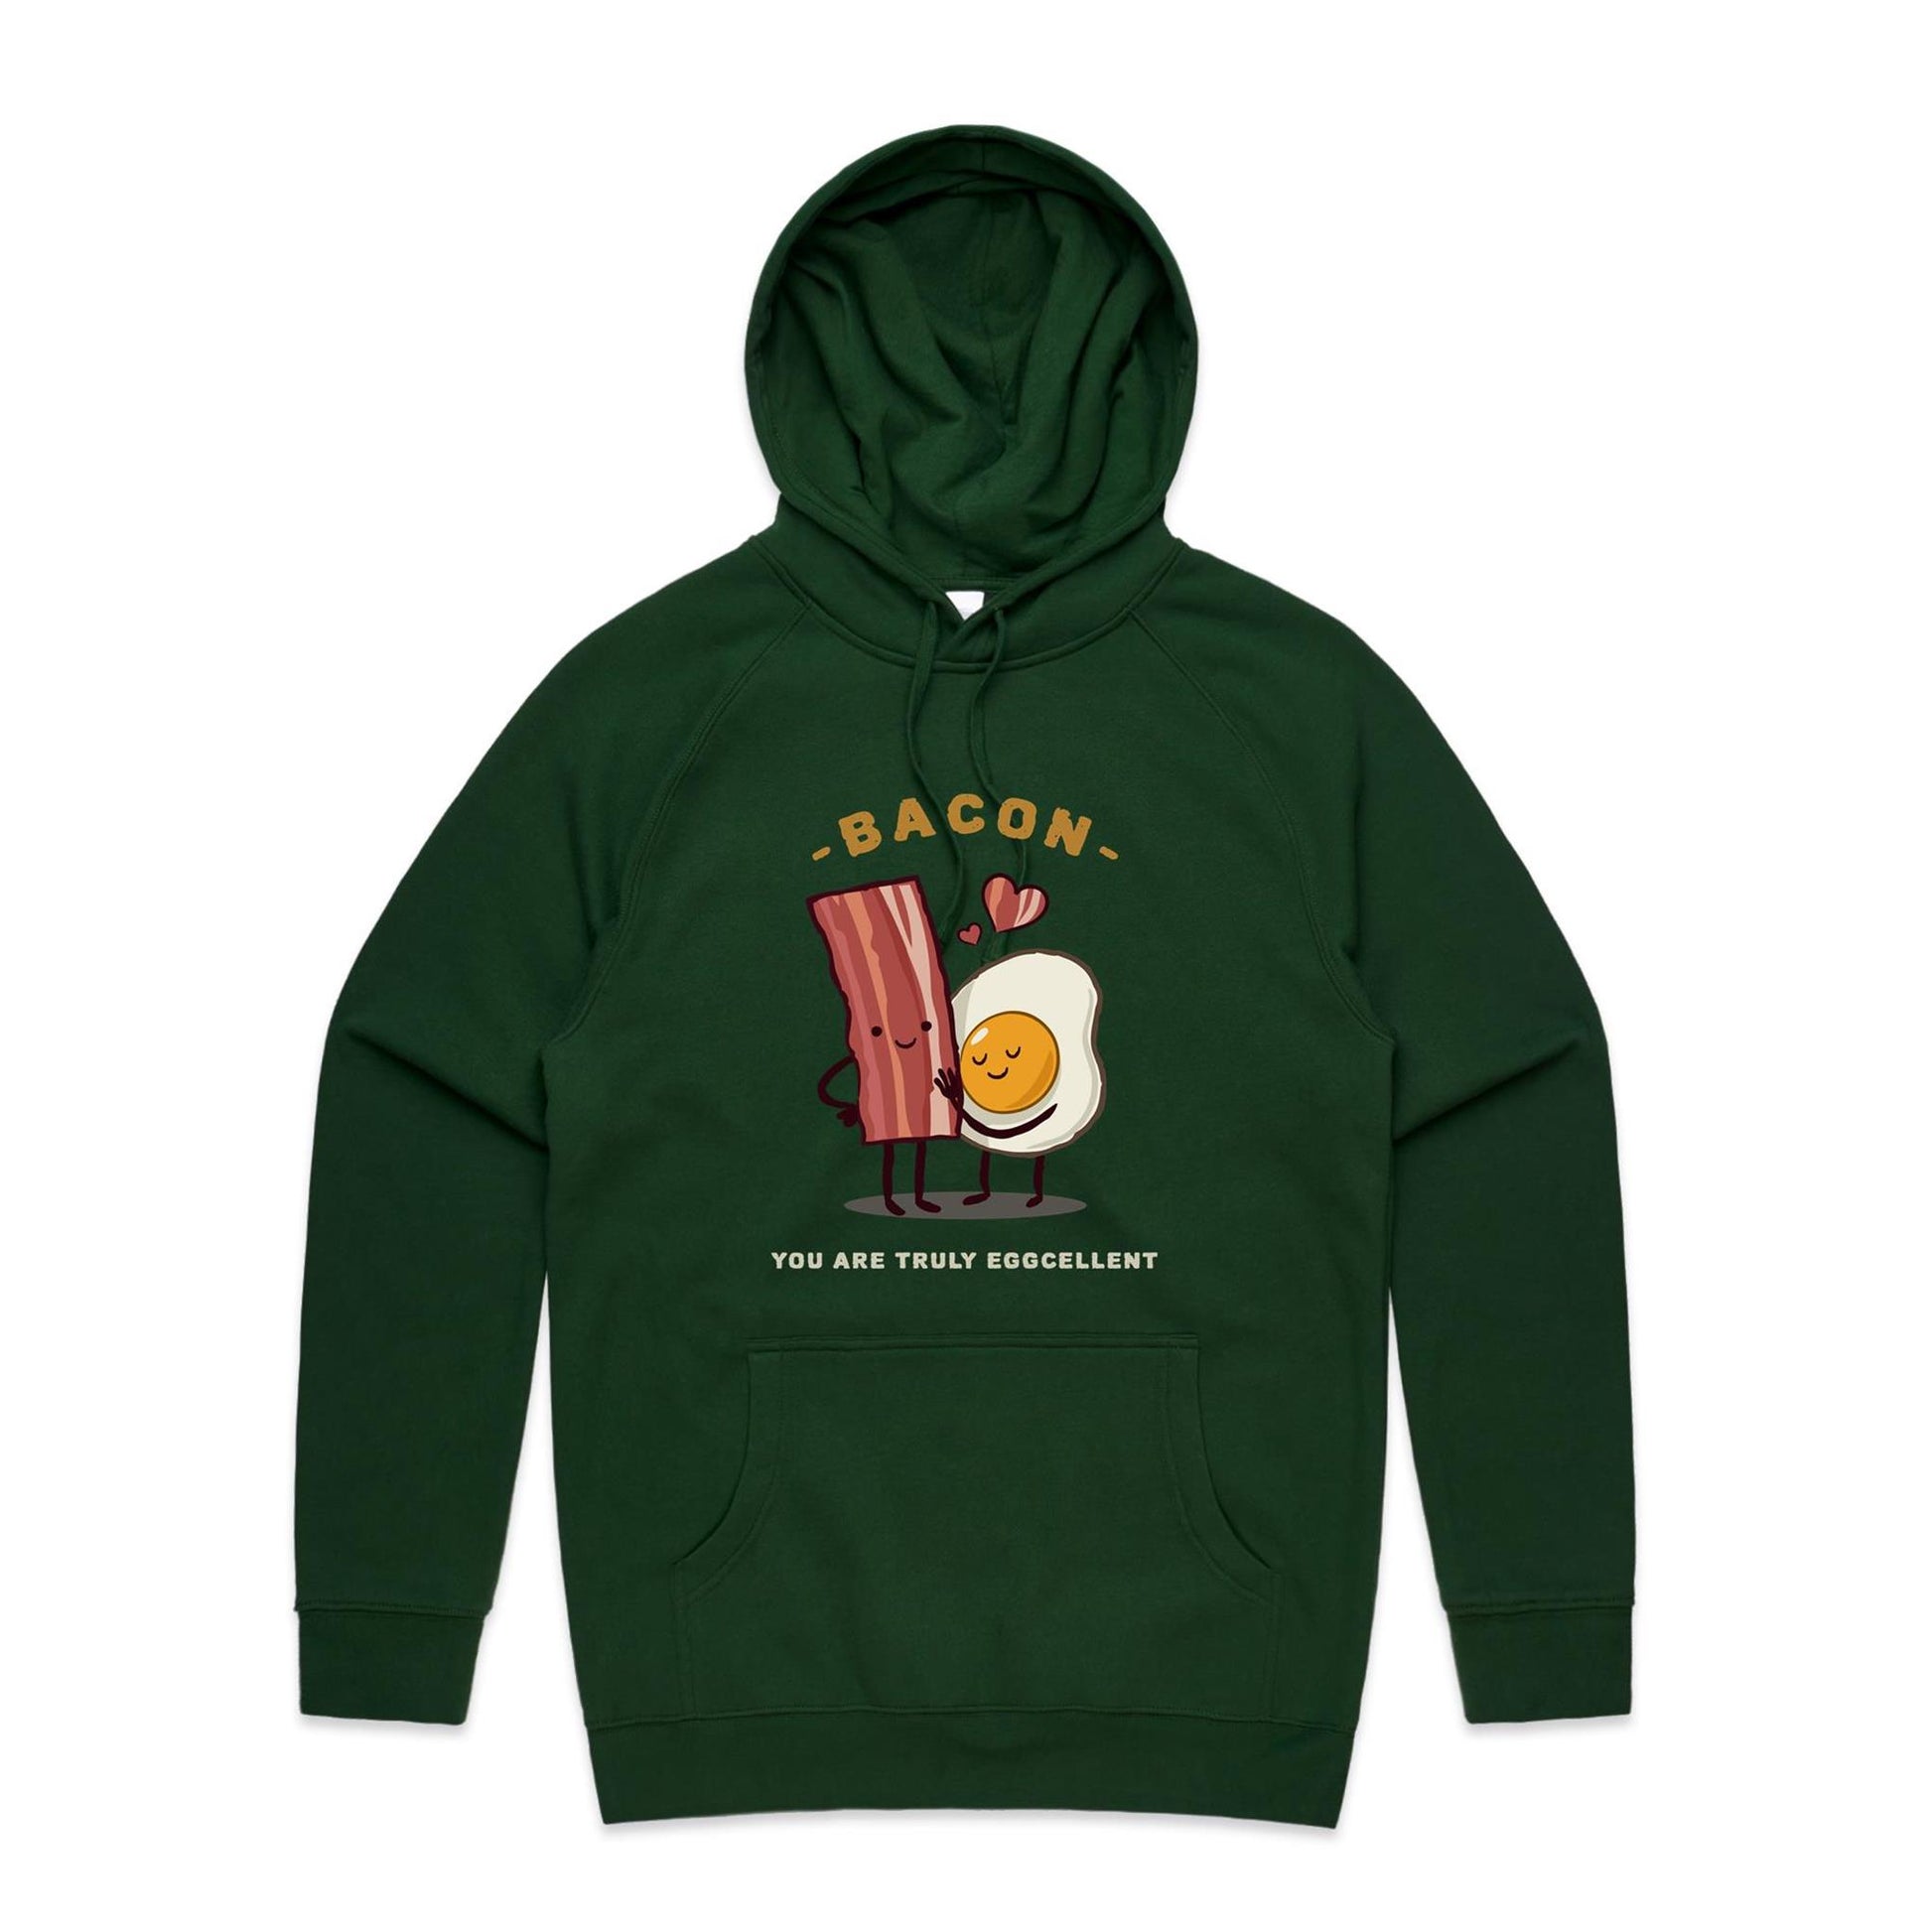 Bacon, You Are Truly Eggcellent - Supply Hood Forest Green Mens Supply Hoodie Food